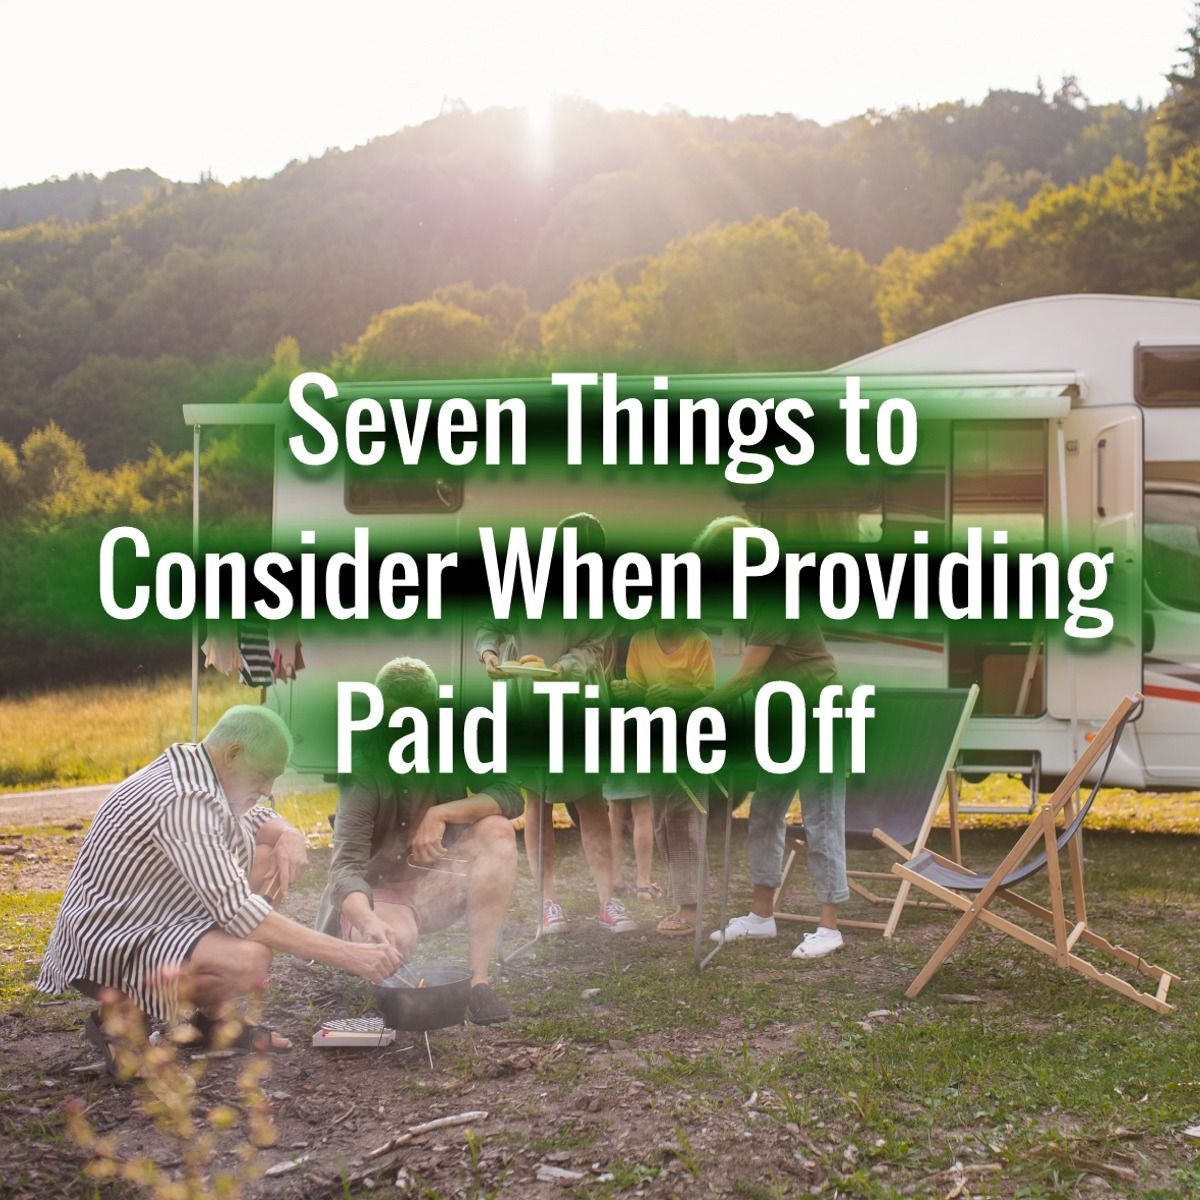 Seven Things to Consider When Providing Paid Time Off